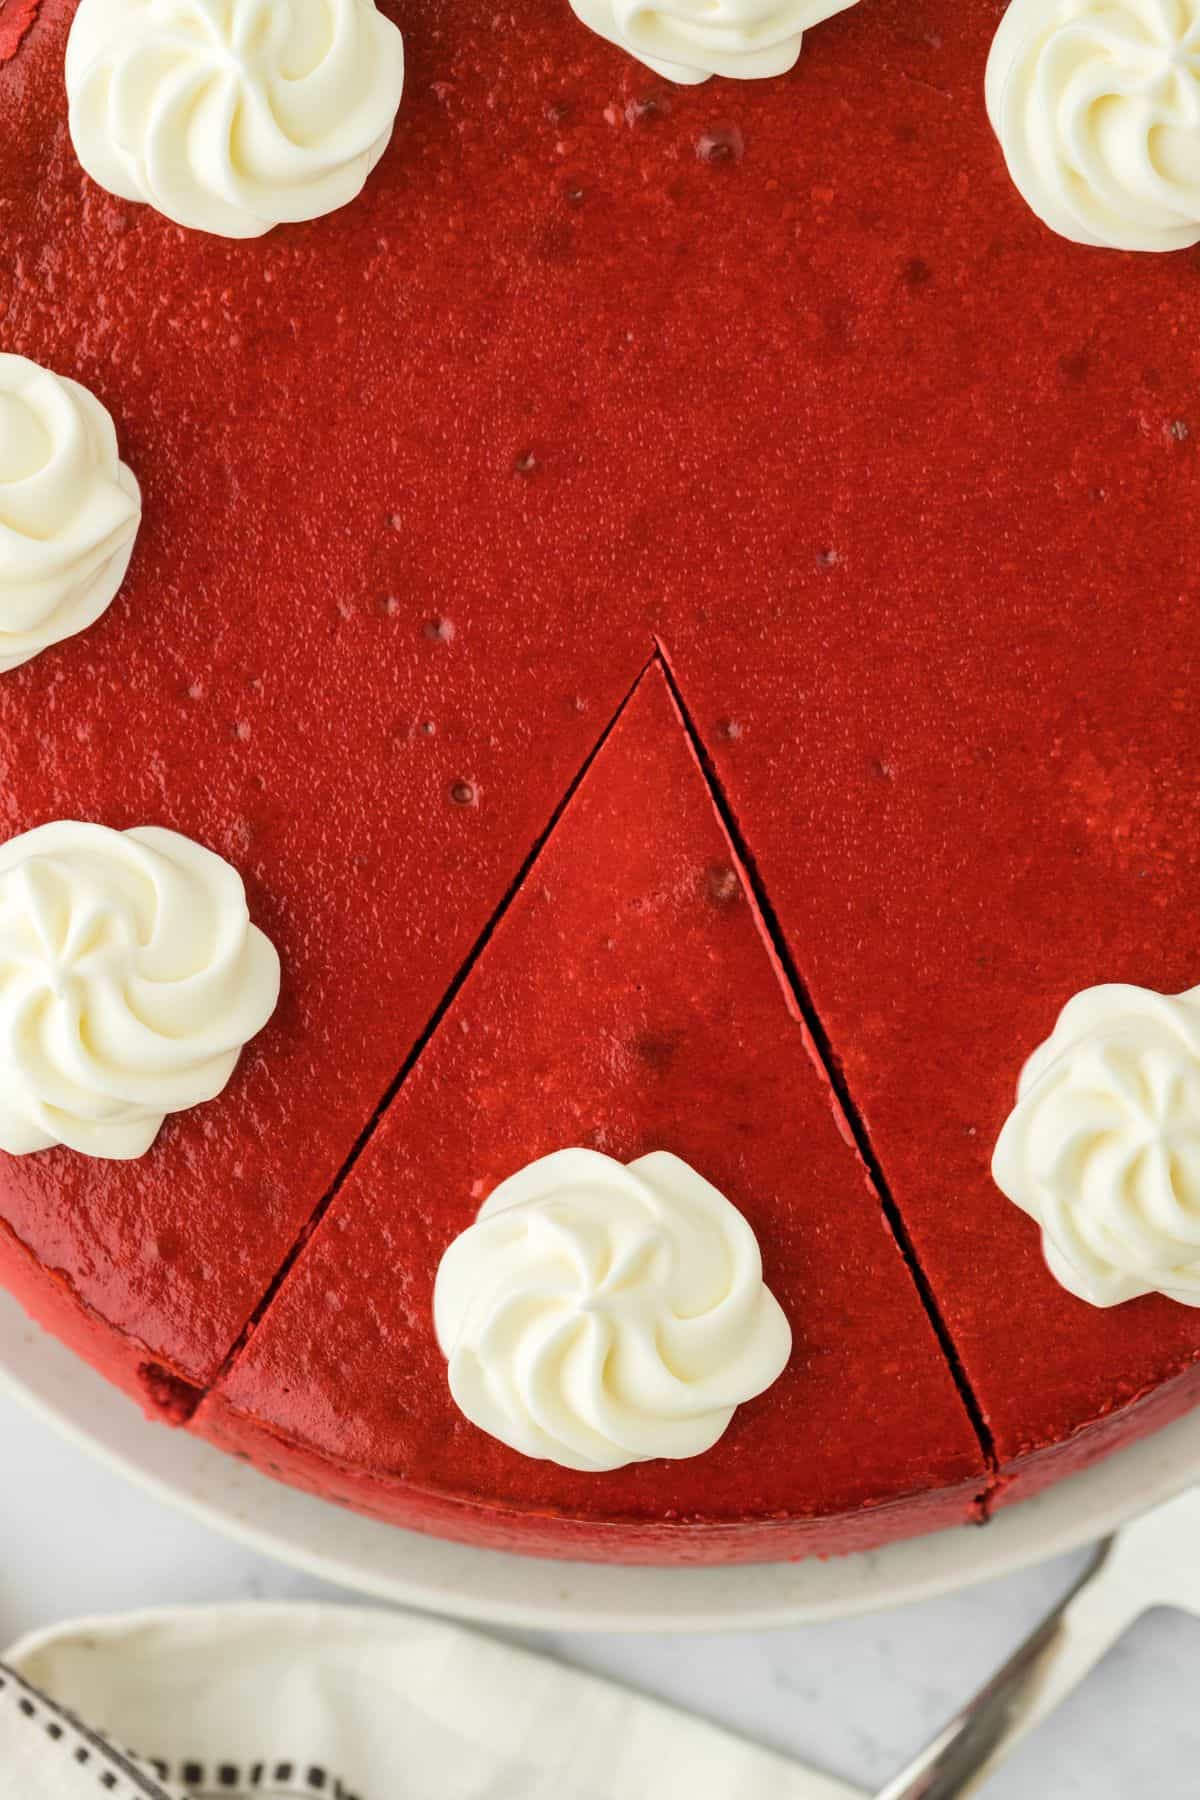 A red velvet cheesecake with a slice cut but not removed from the cheesecake.